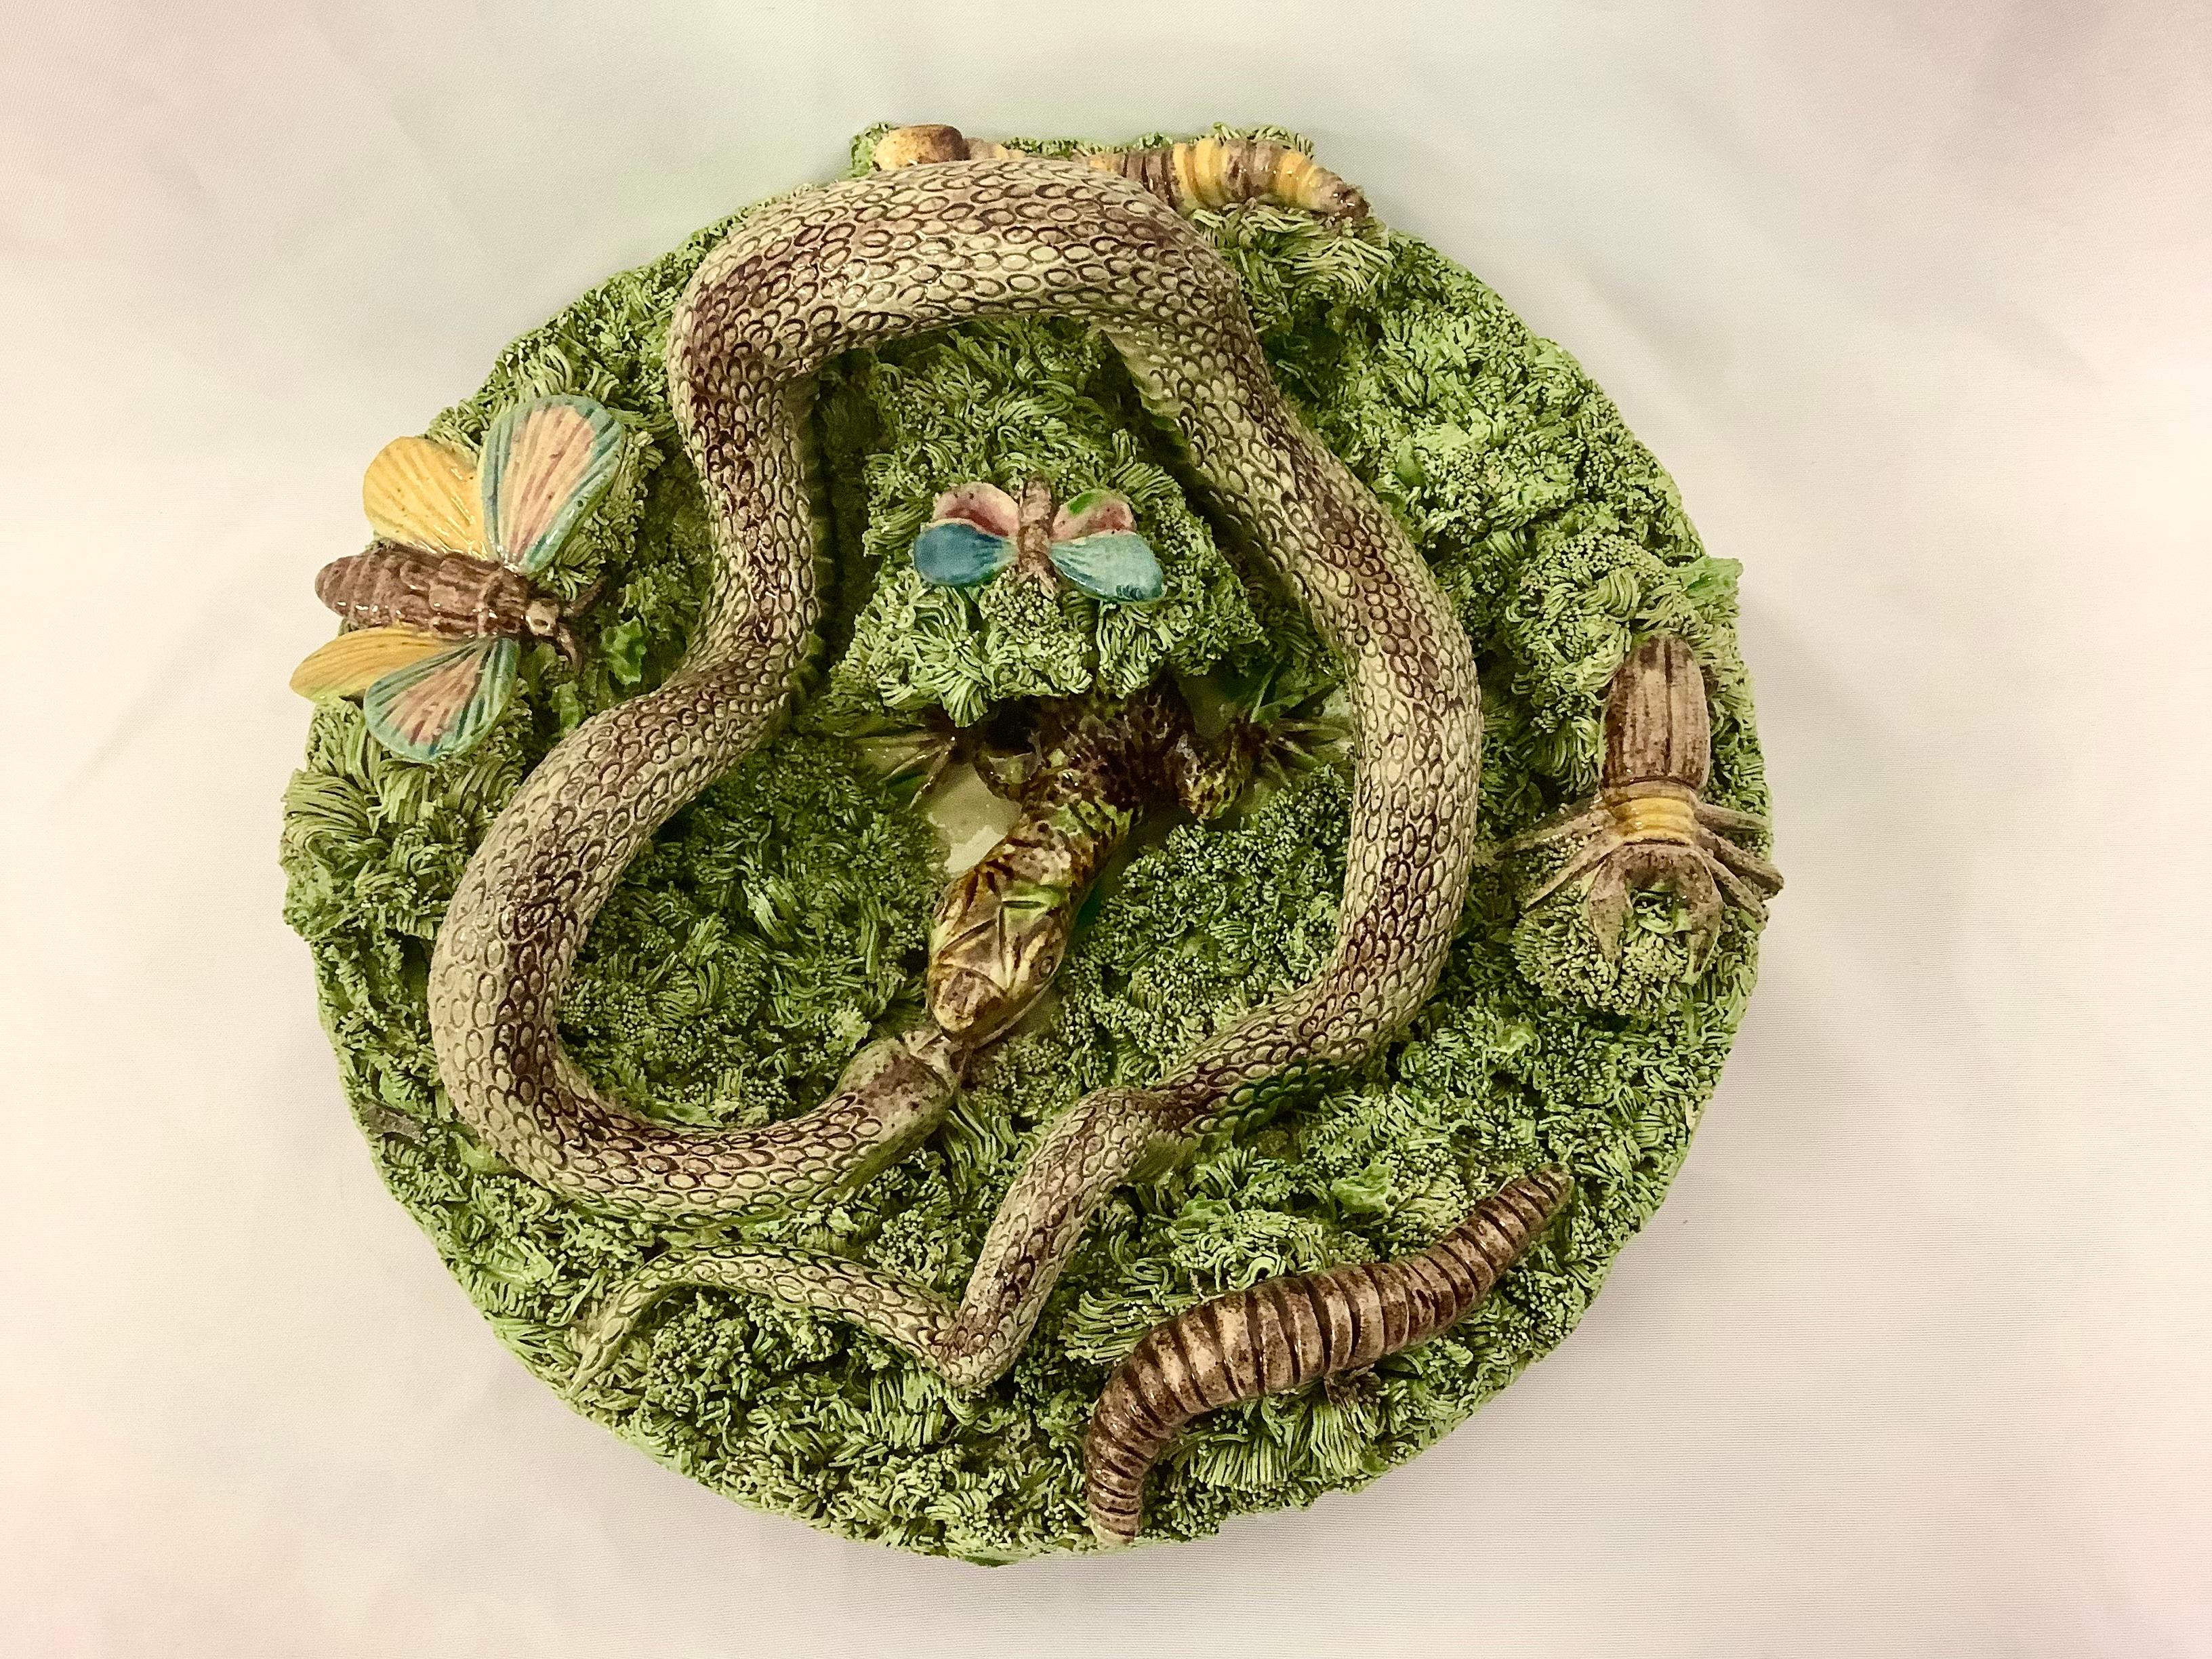 Antique 19th century Portuguese Majolica Palissy style plate with large snake and large lizard searching through mossy tuft, signed Jose Alves Cunha (Caldas da Rainha) with snake, worm, caterpillar, butterfly, frog and lizard. Impressed mark on back.